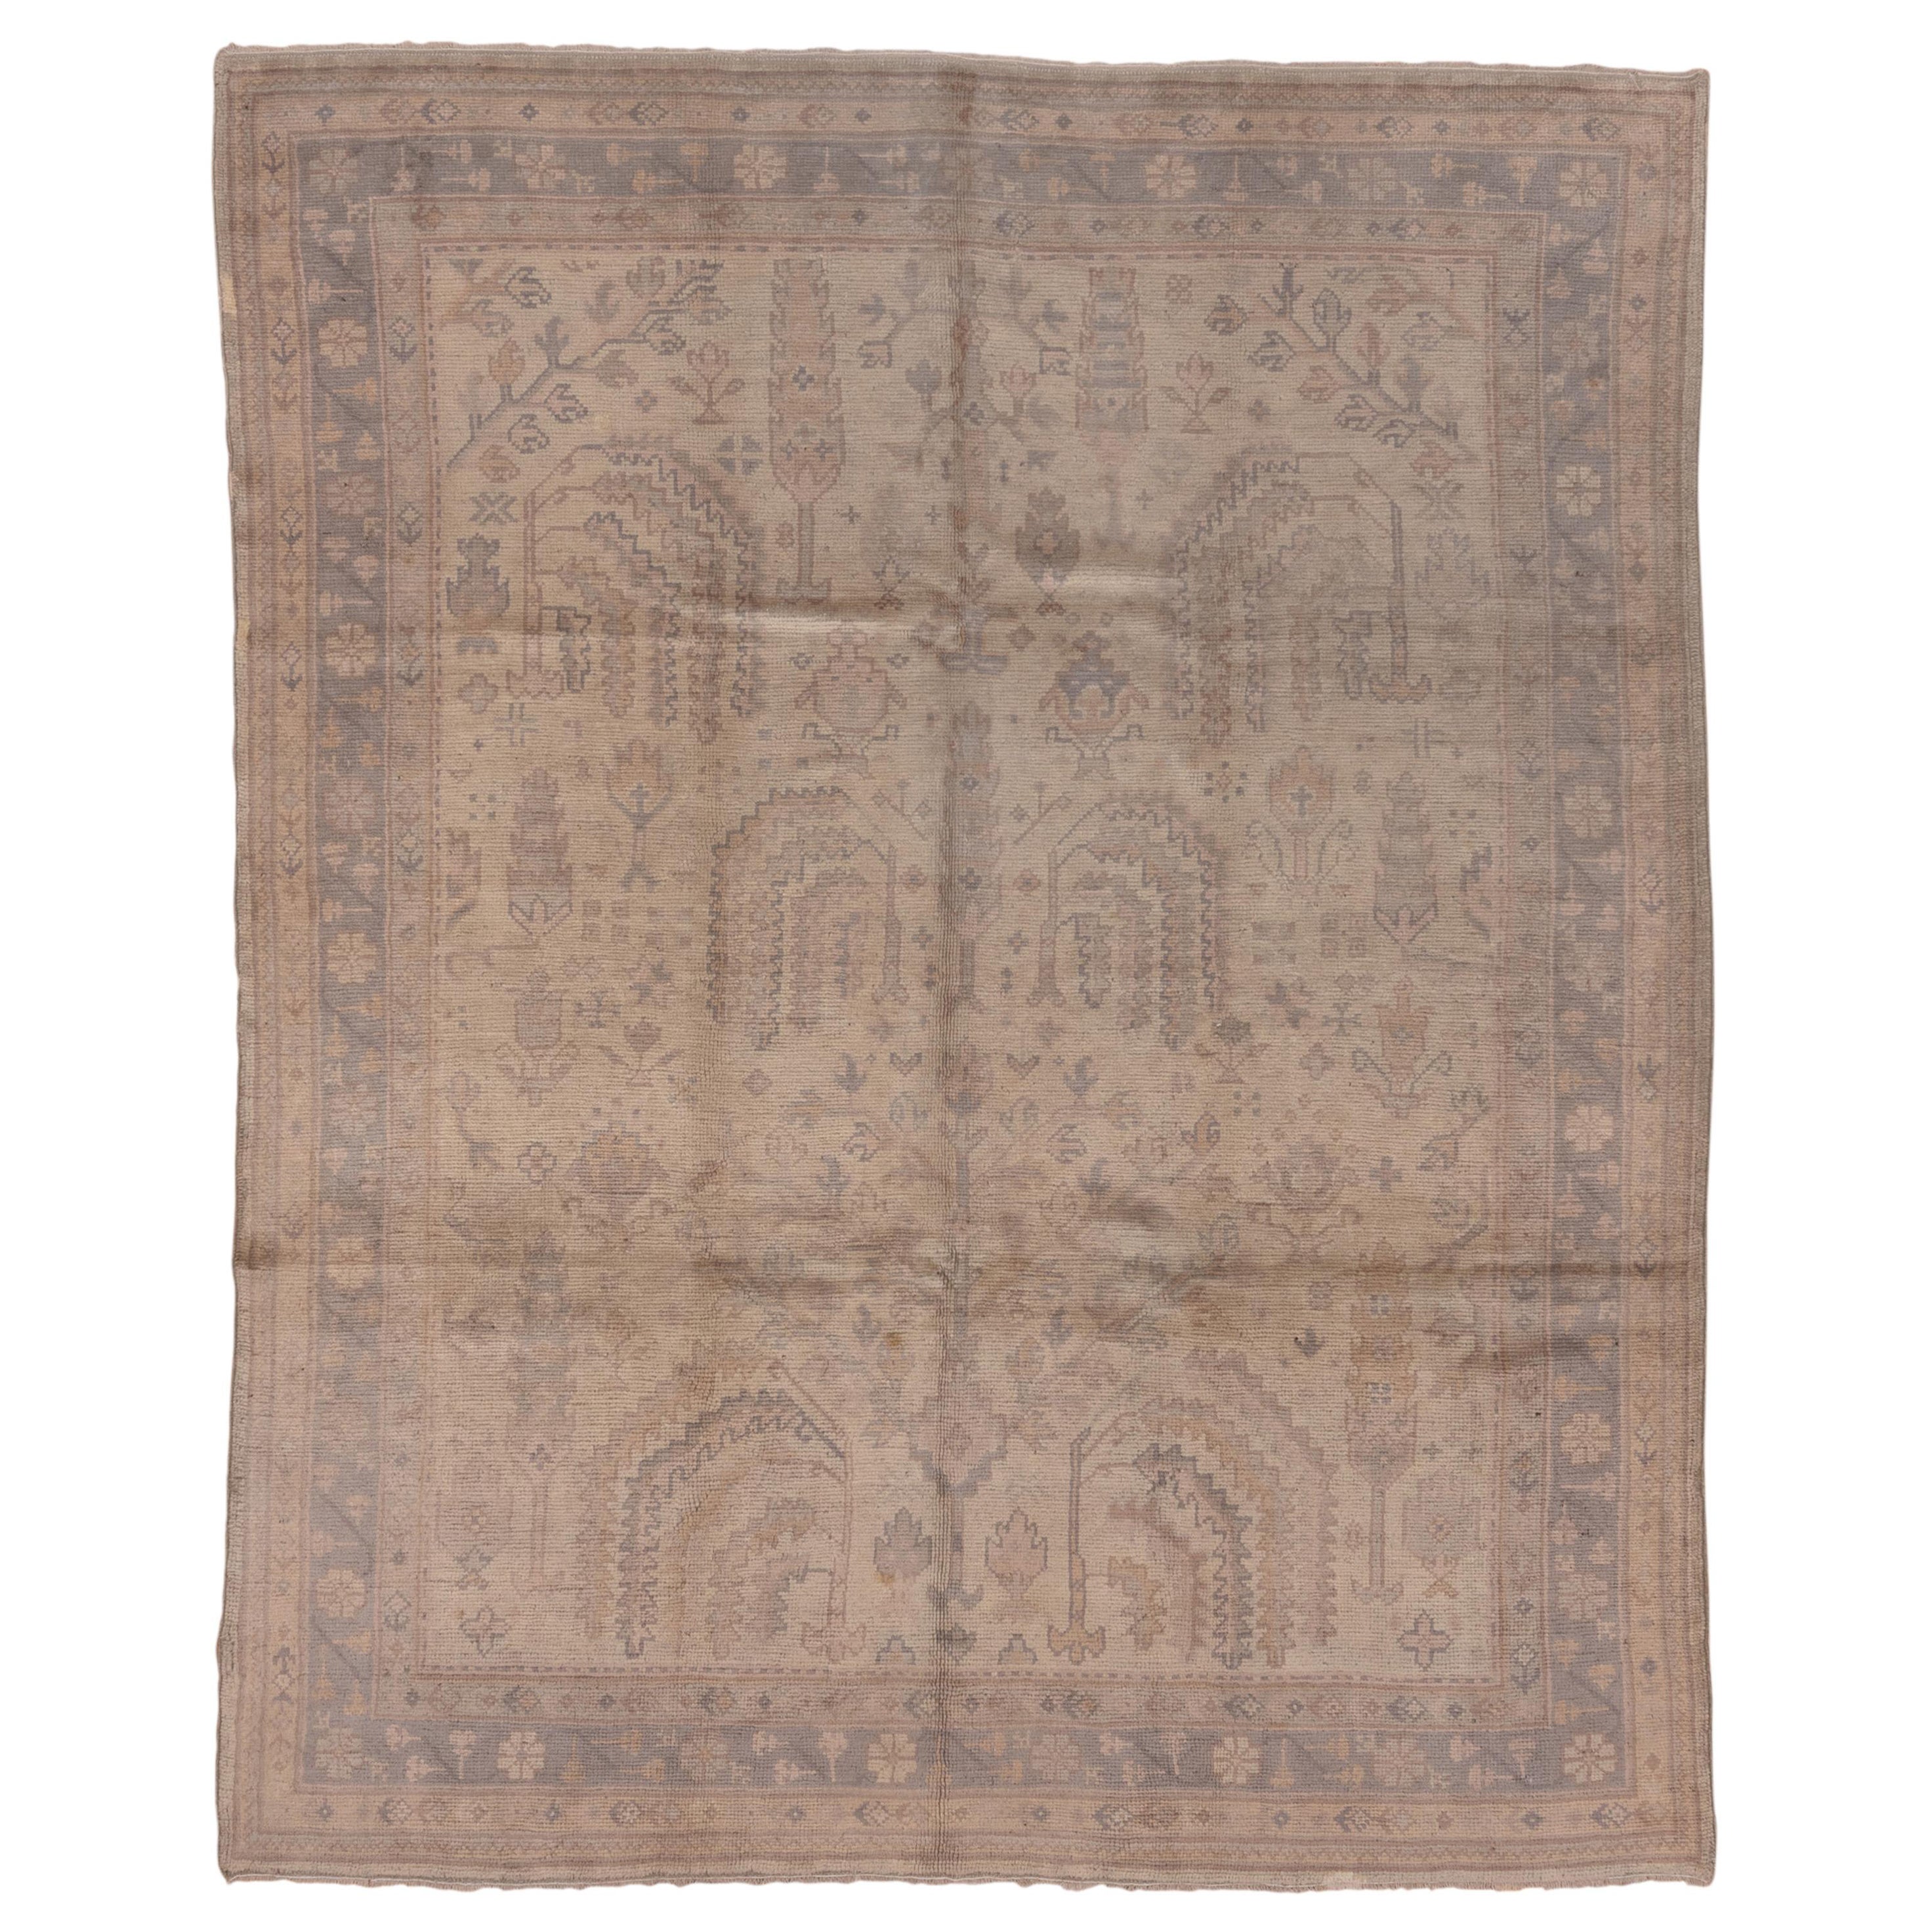 Antique Turkish Oushak Rug, Beige FIeld, Periwinkle Borders, Light Pink Accents For Sale